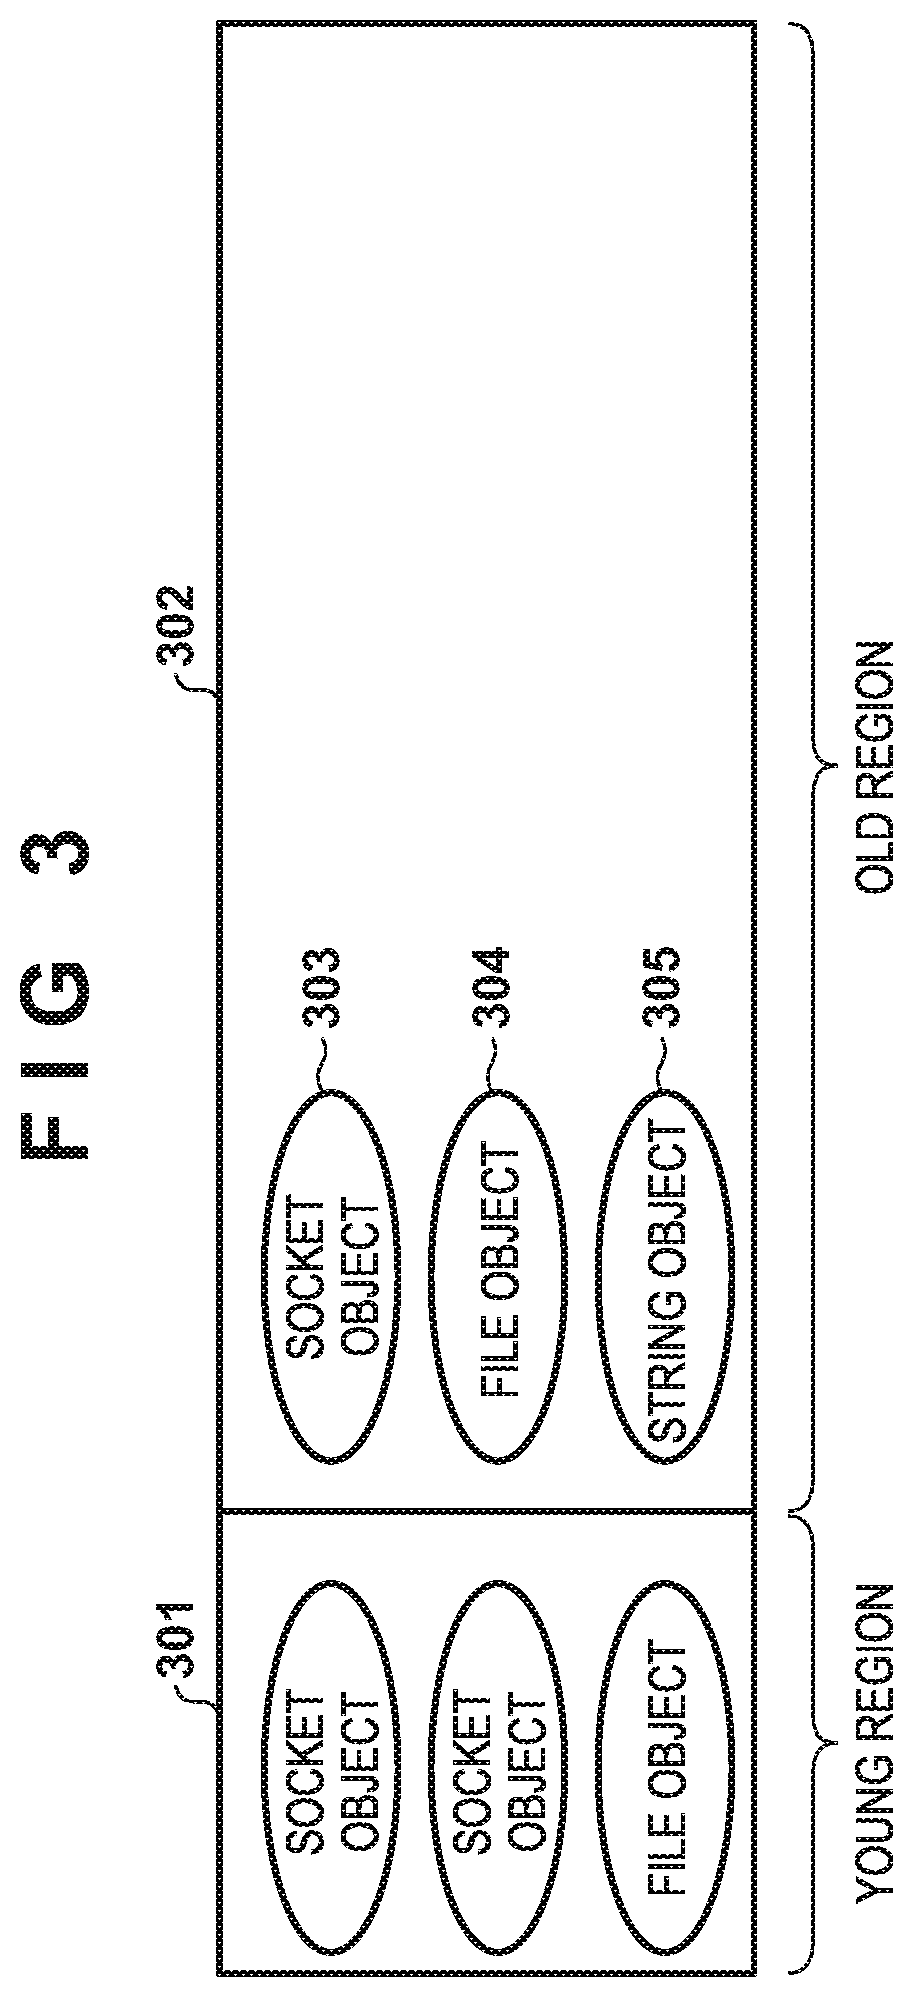 Apparatus and method for garbage collection on socket objects